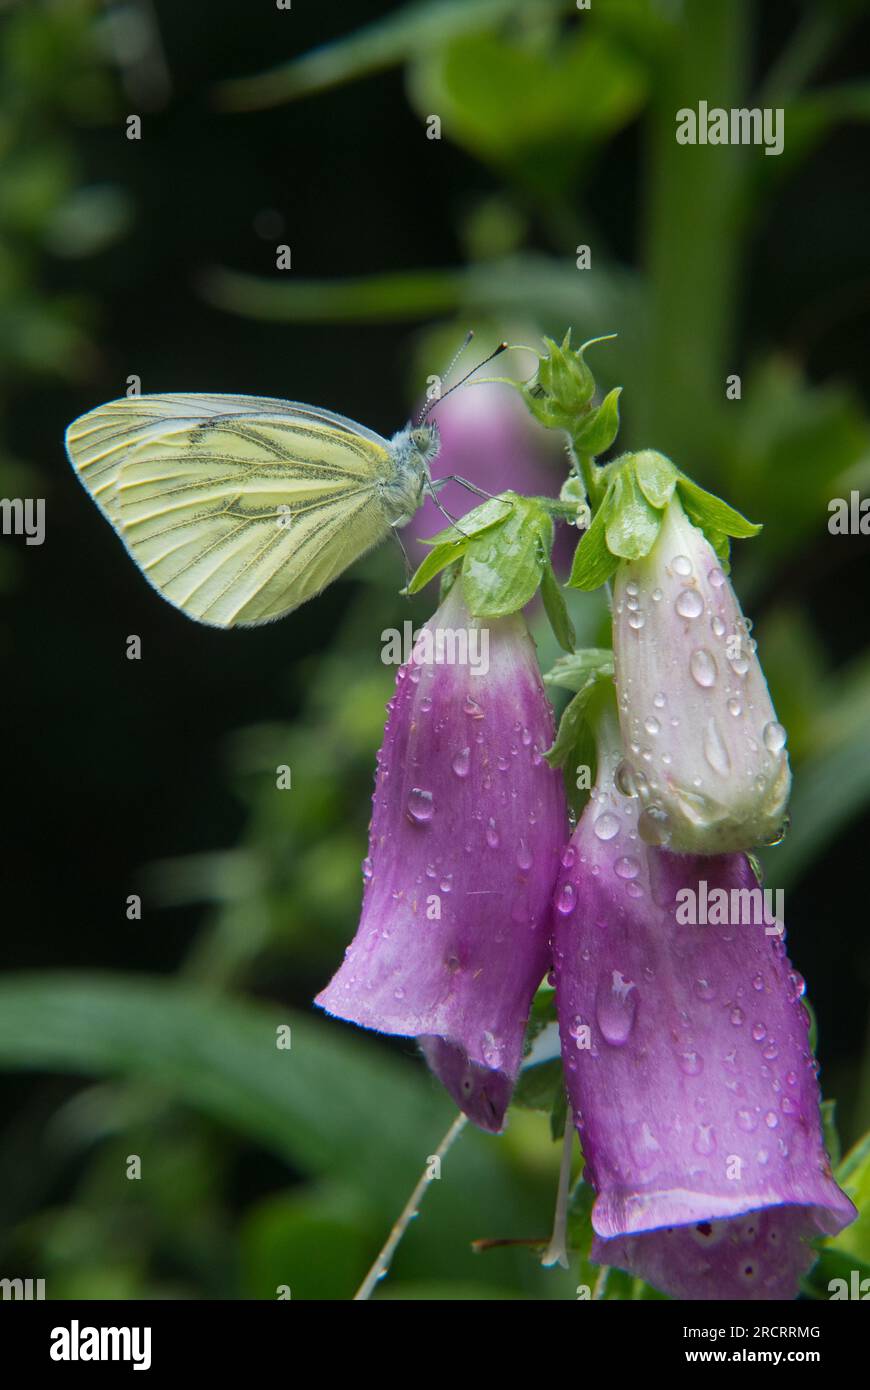 Green-veined white on flower of flower of Foxglove, covered with dewdrops Stock Photo